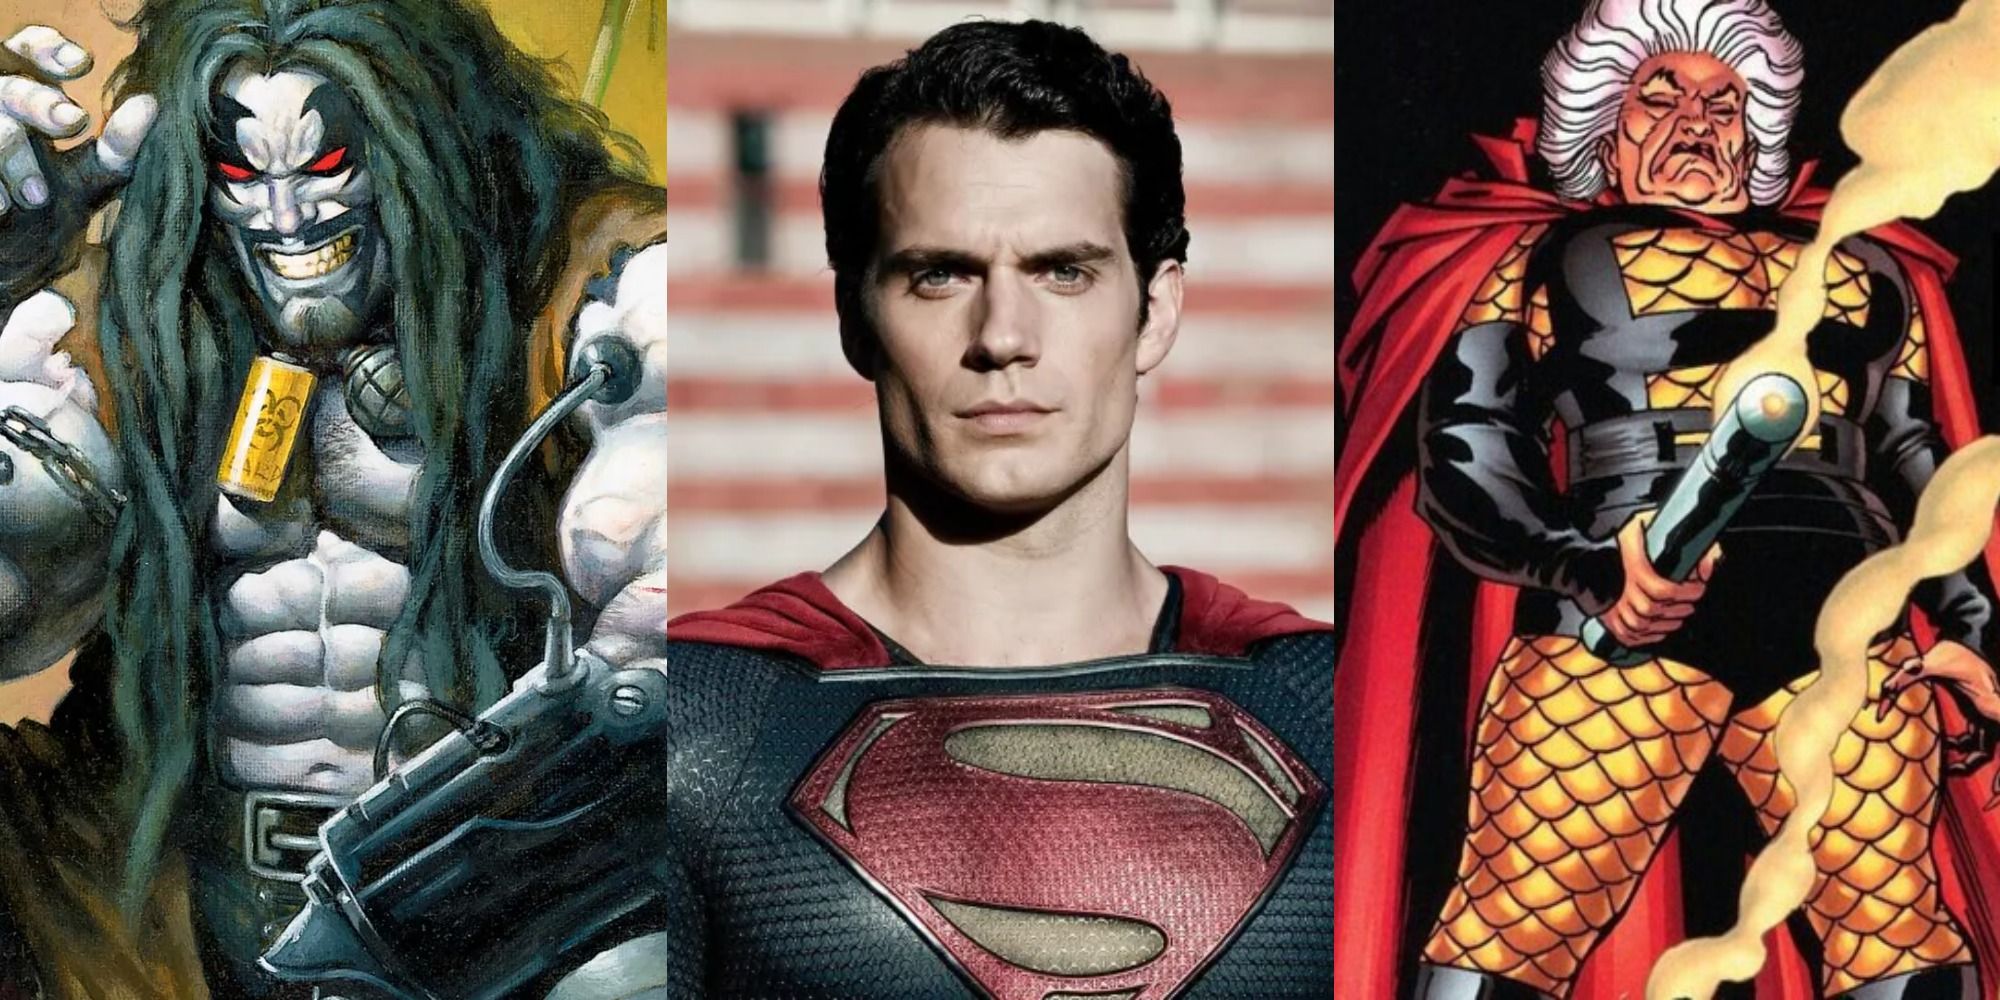 Split image showing Lobo, Henry Cavill in Man of Steel, and Granny Goodness